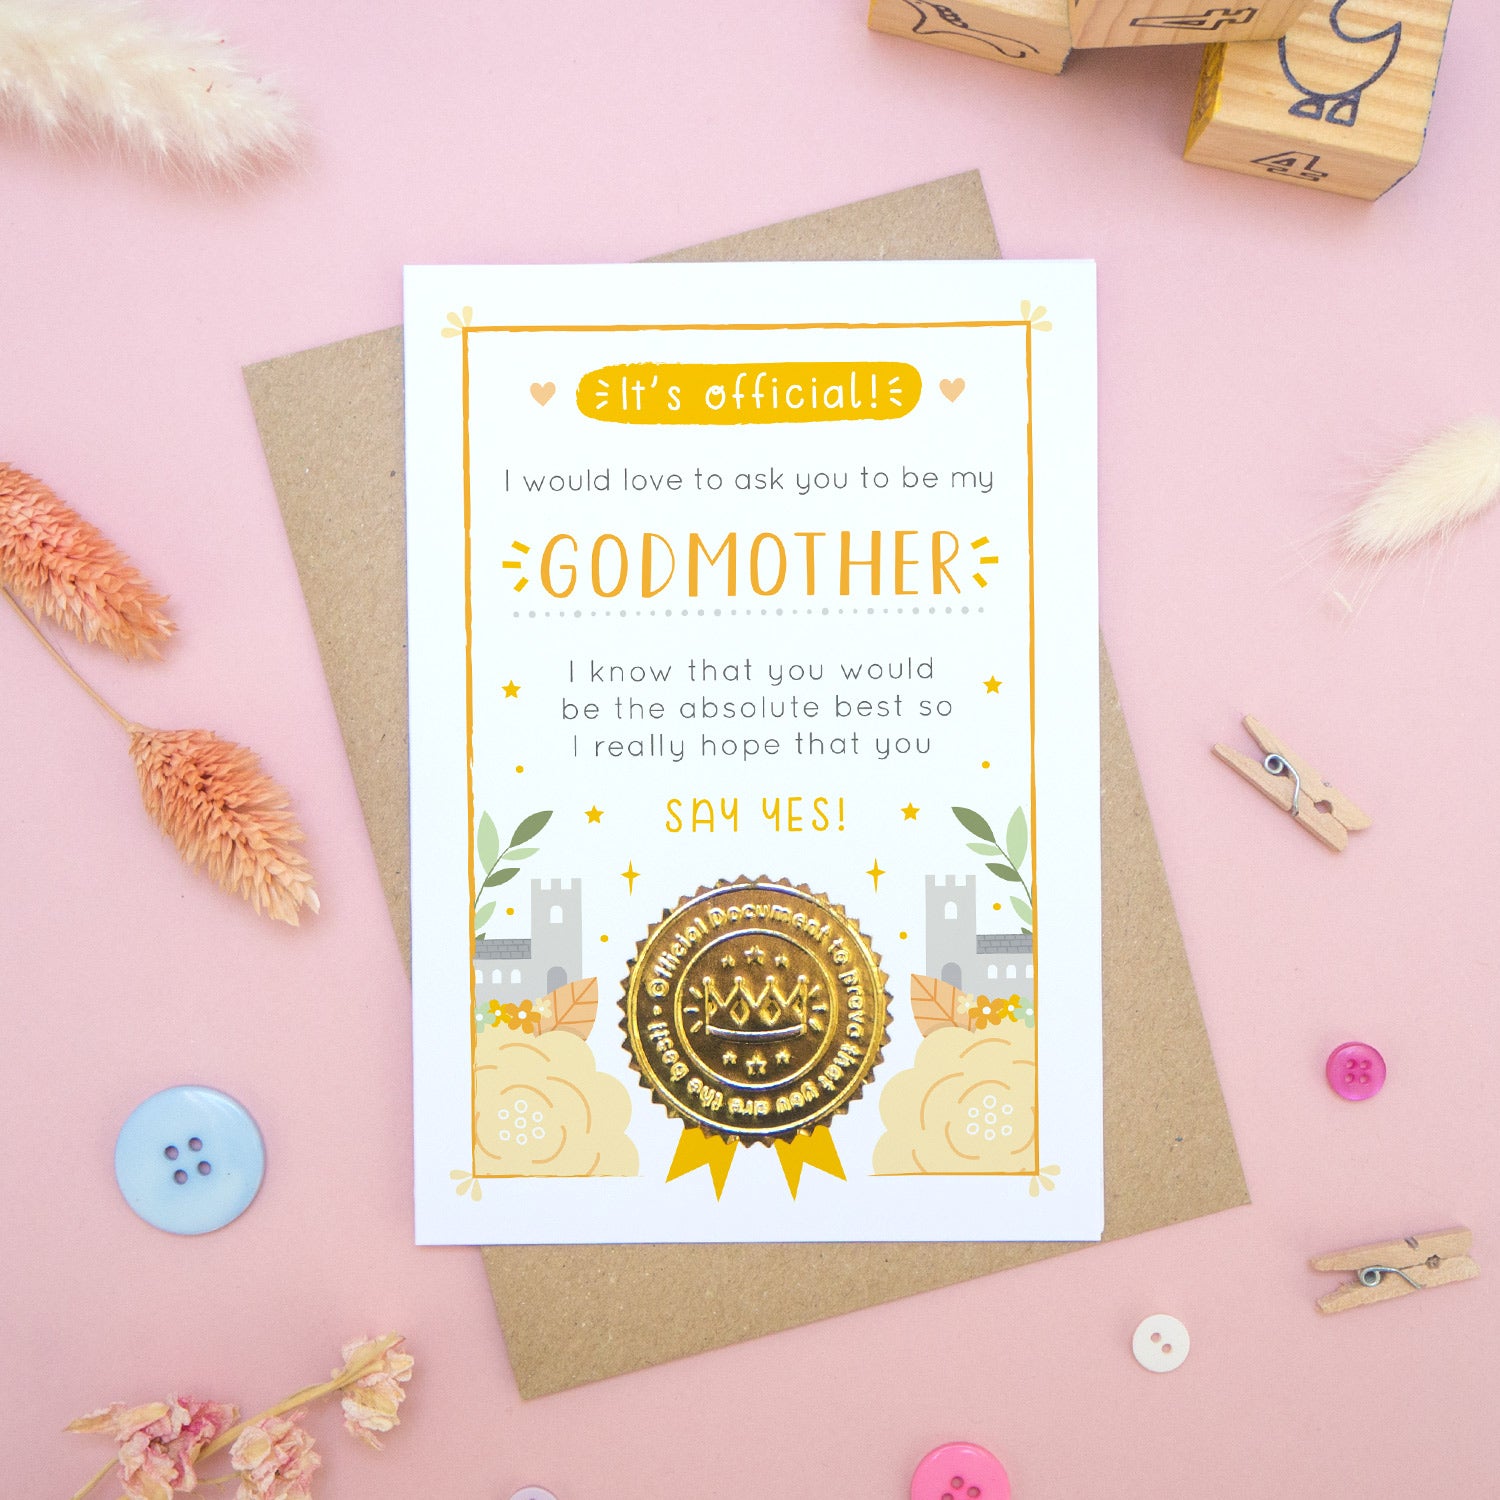 A will you be my godmother card in orange, shot on a pink background surrounded by dry flowers, buttons and building blocks.